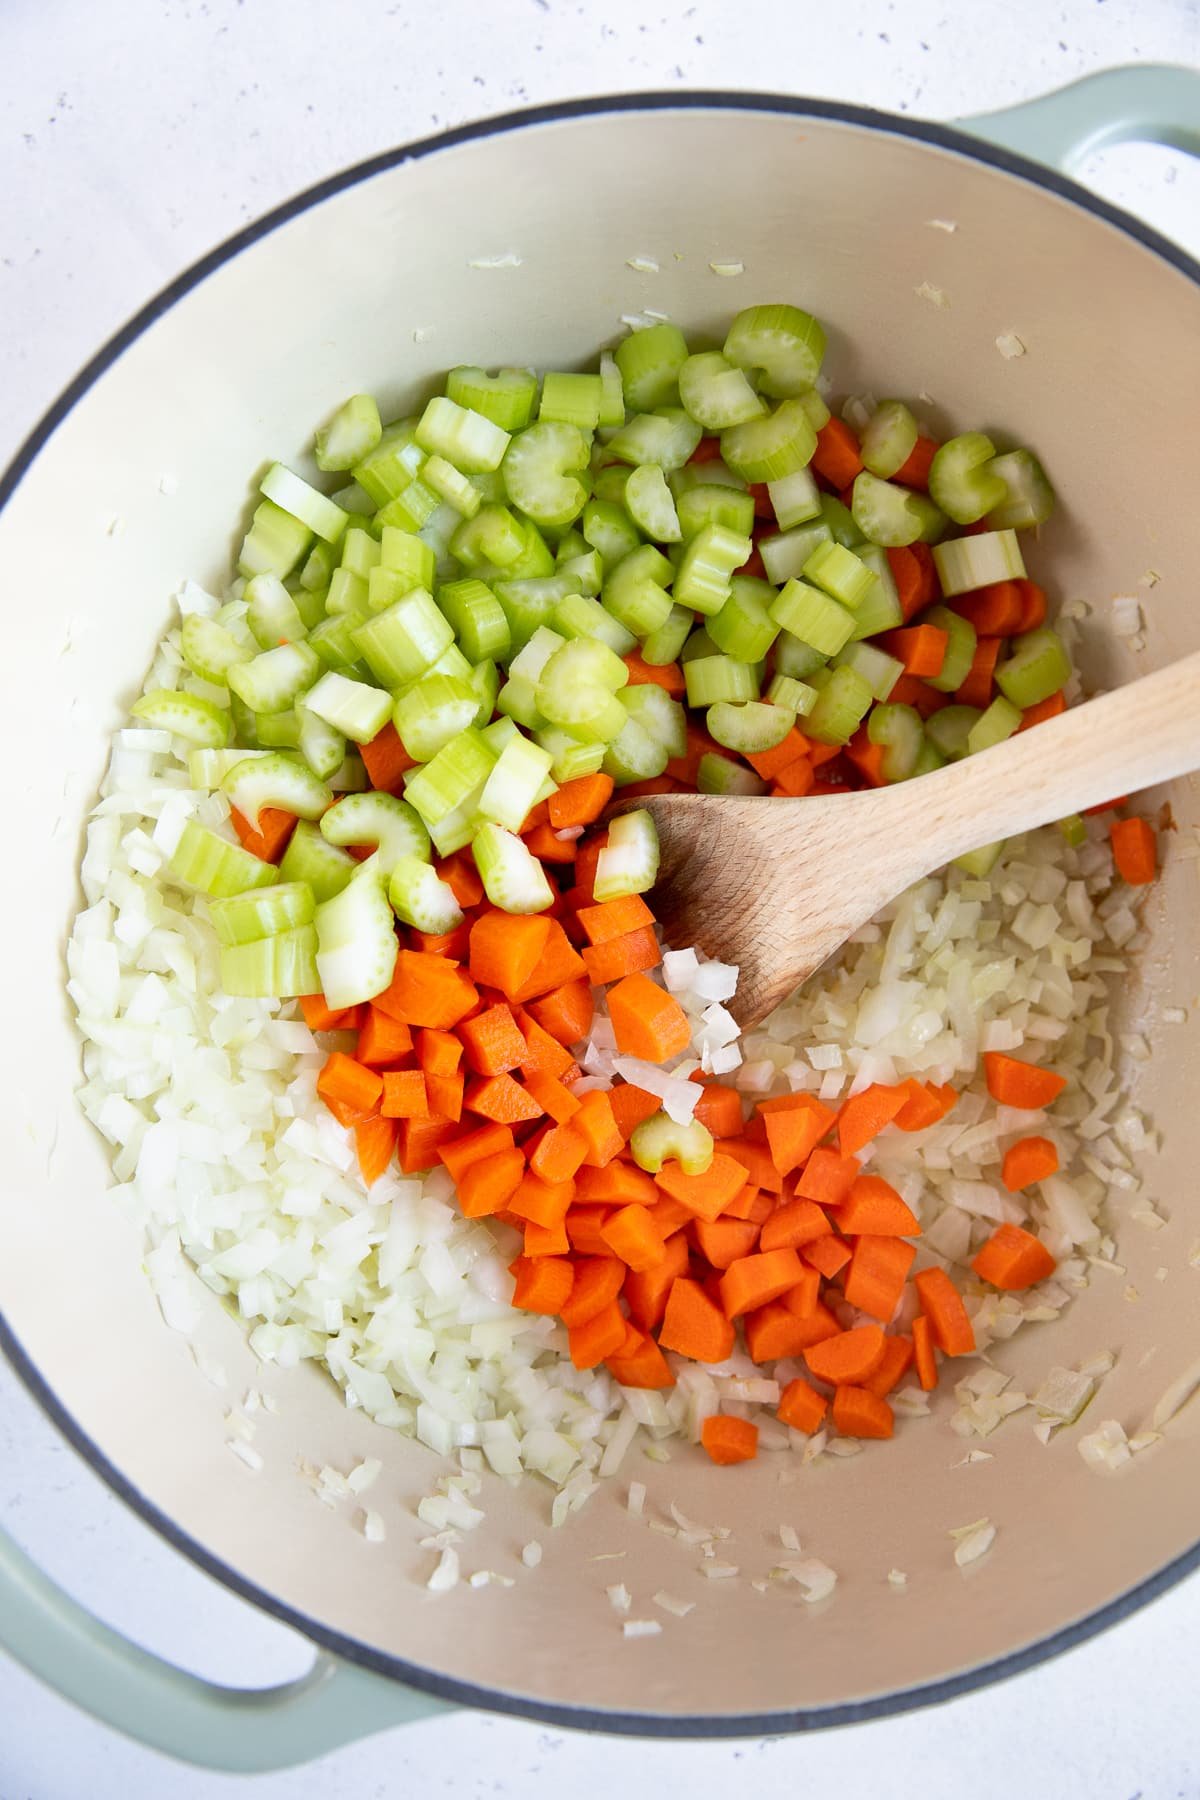 Mirepoix cooking in a large pot.